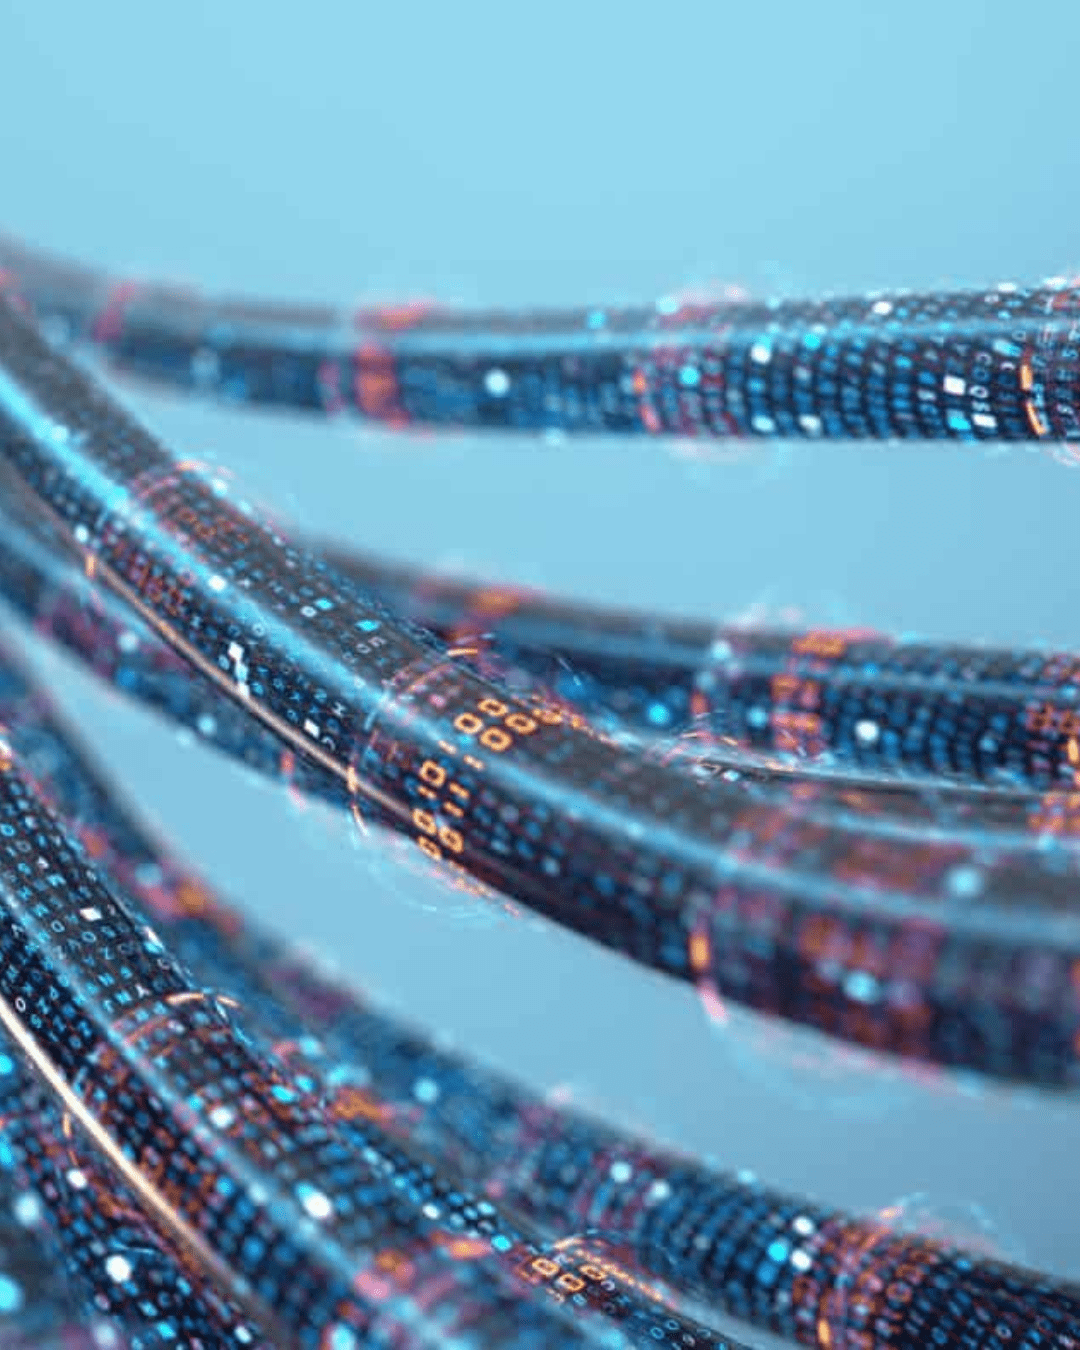 Trustack MSP Cyber Security, IT Services, IT Support. Close-up image of several data cables or fibers with illuminated binary code patterns (ones and zeroes) on them, resembling an ISDN network. The background is a soft blue gradient, giving the image a high-tech and futuristic feel.